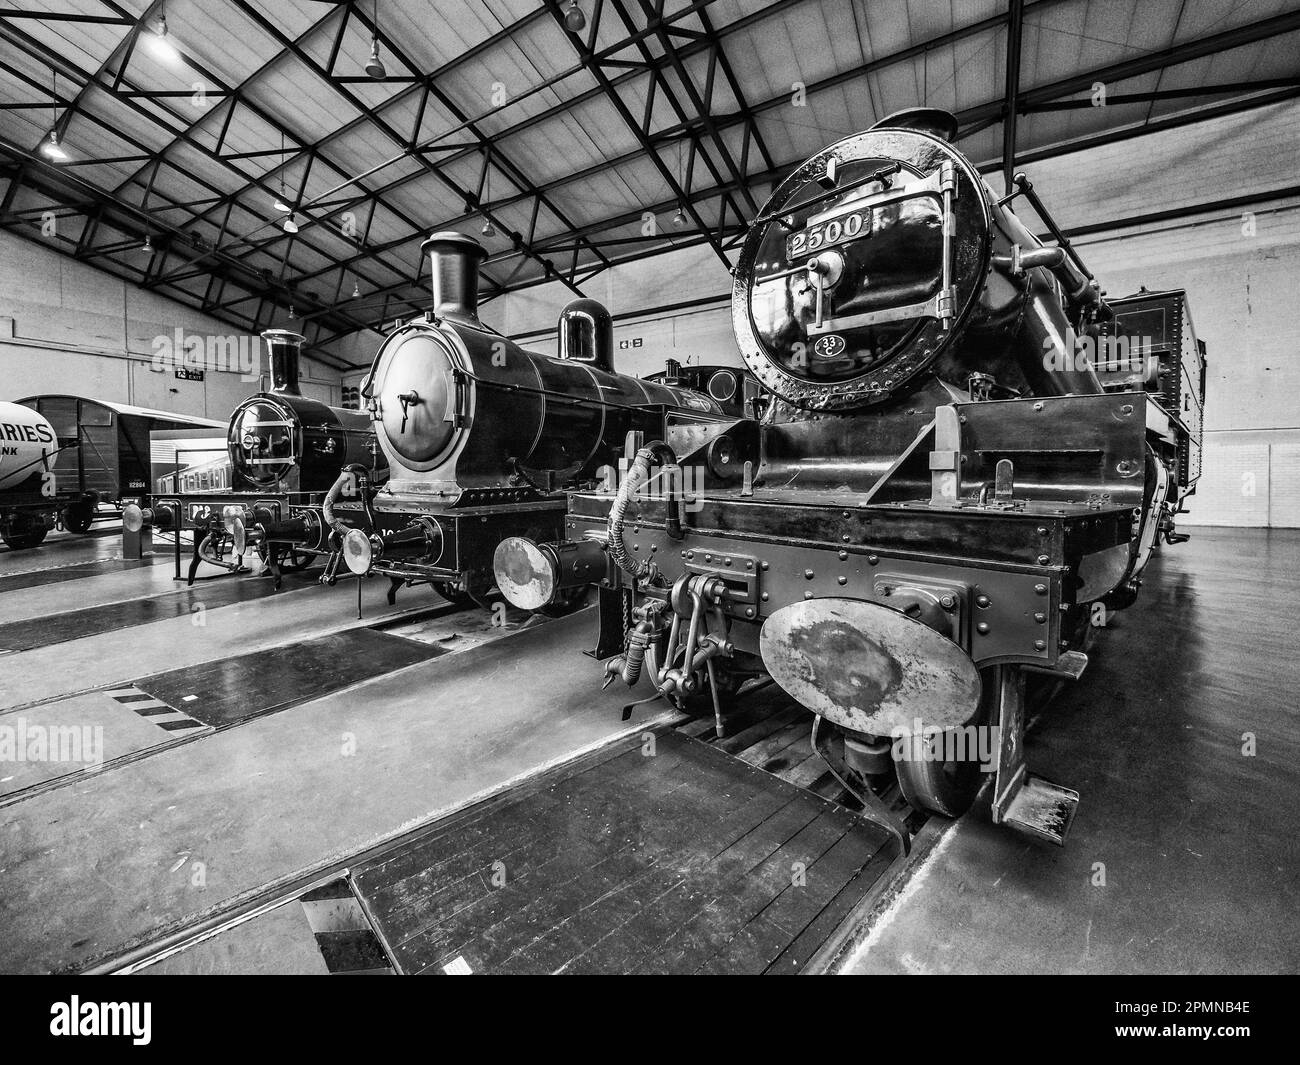 General image inside the National Railway Museum in York seen here featuring various locomotives Stock Photo